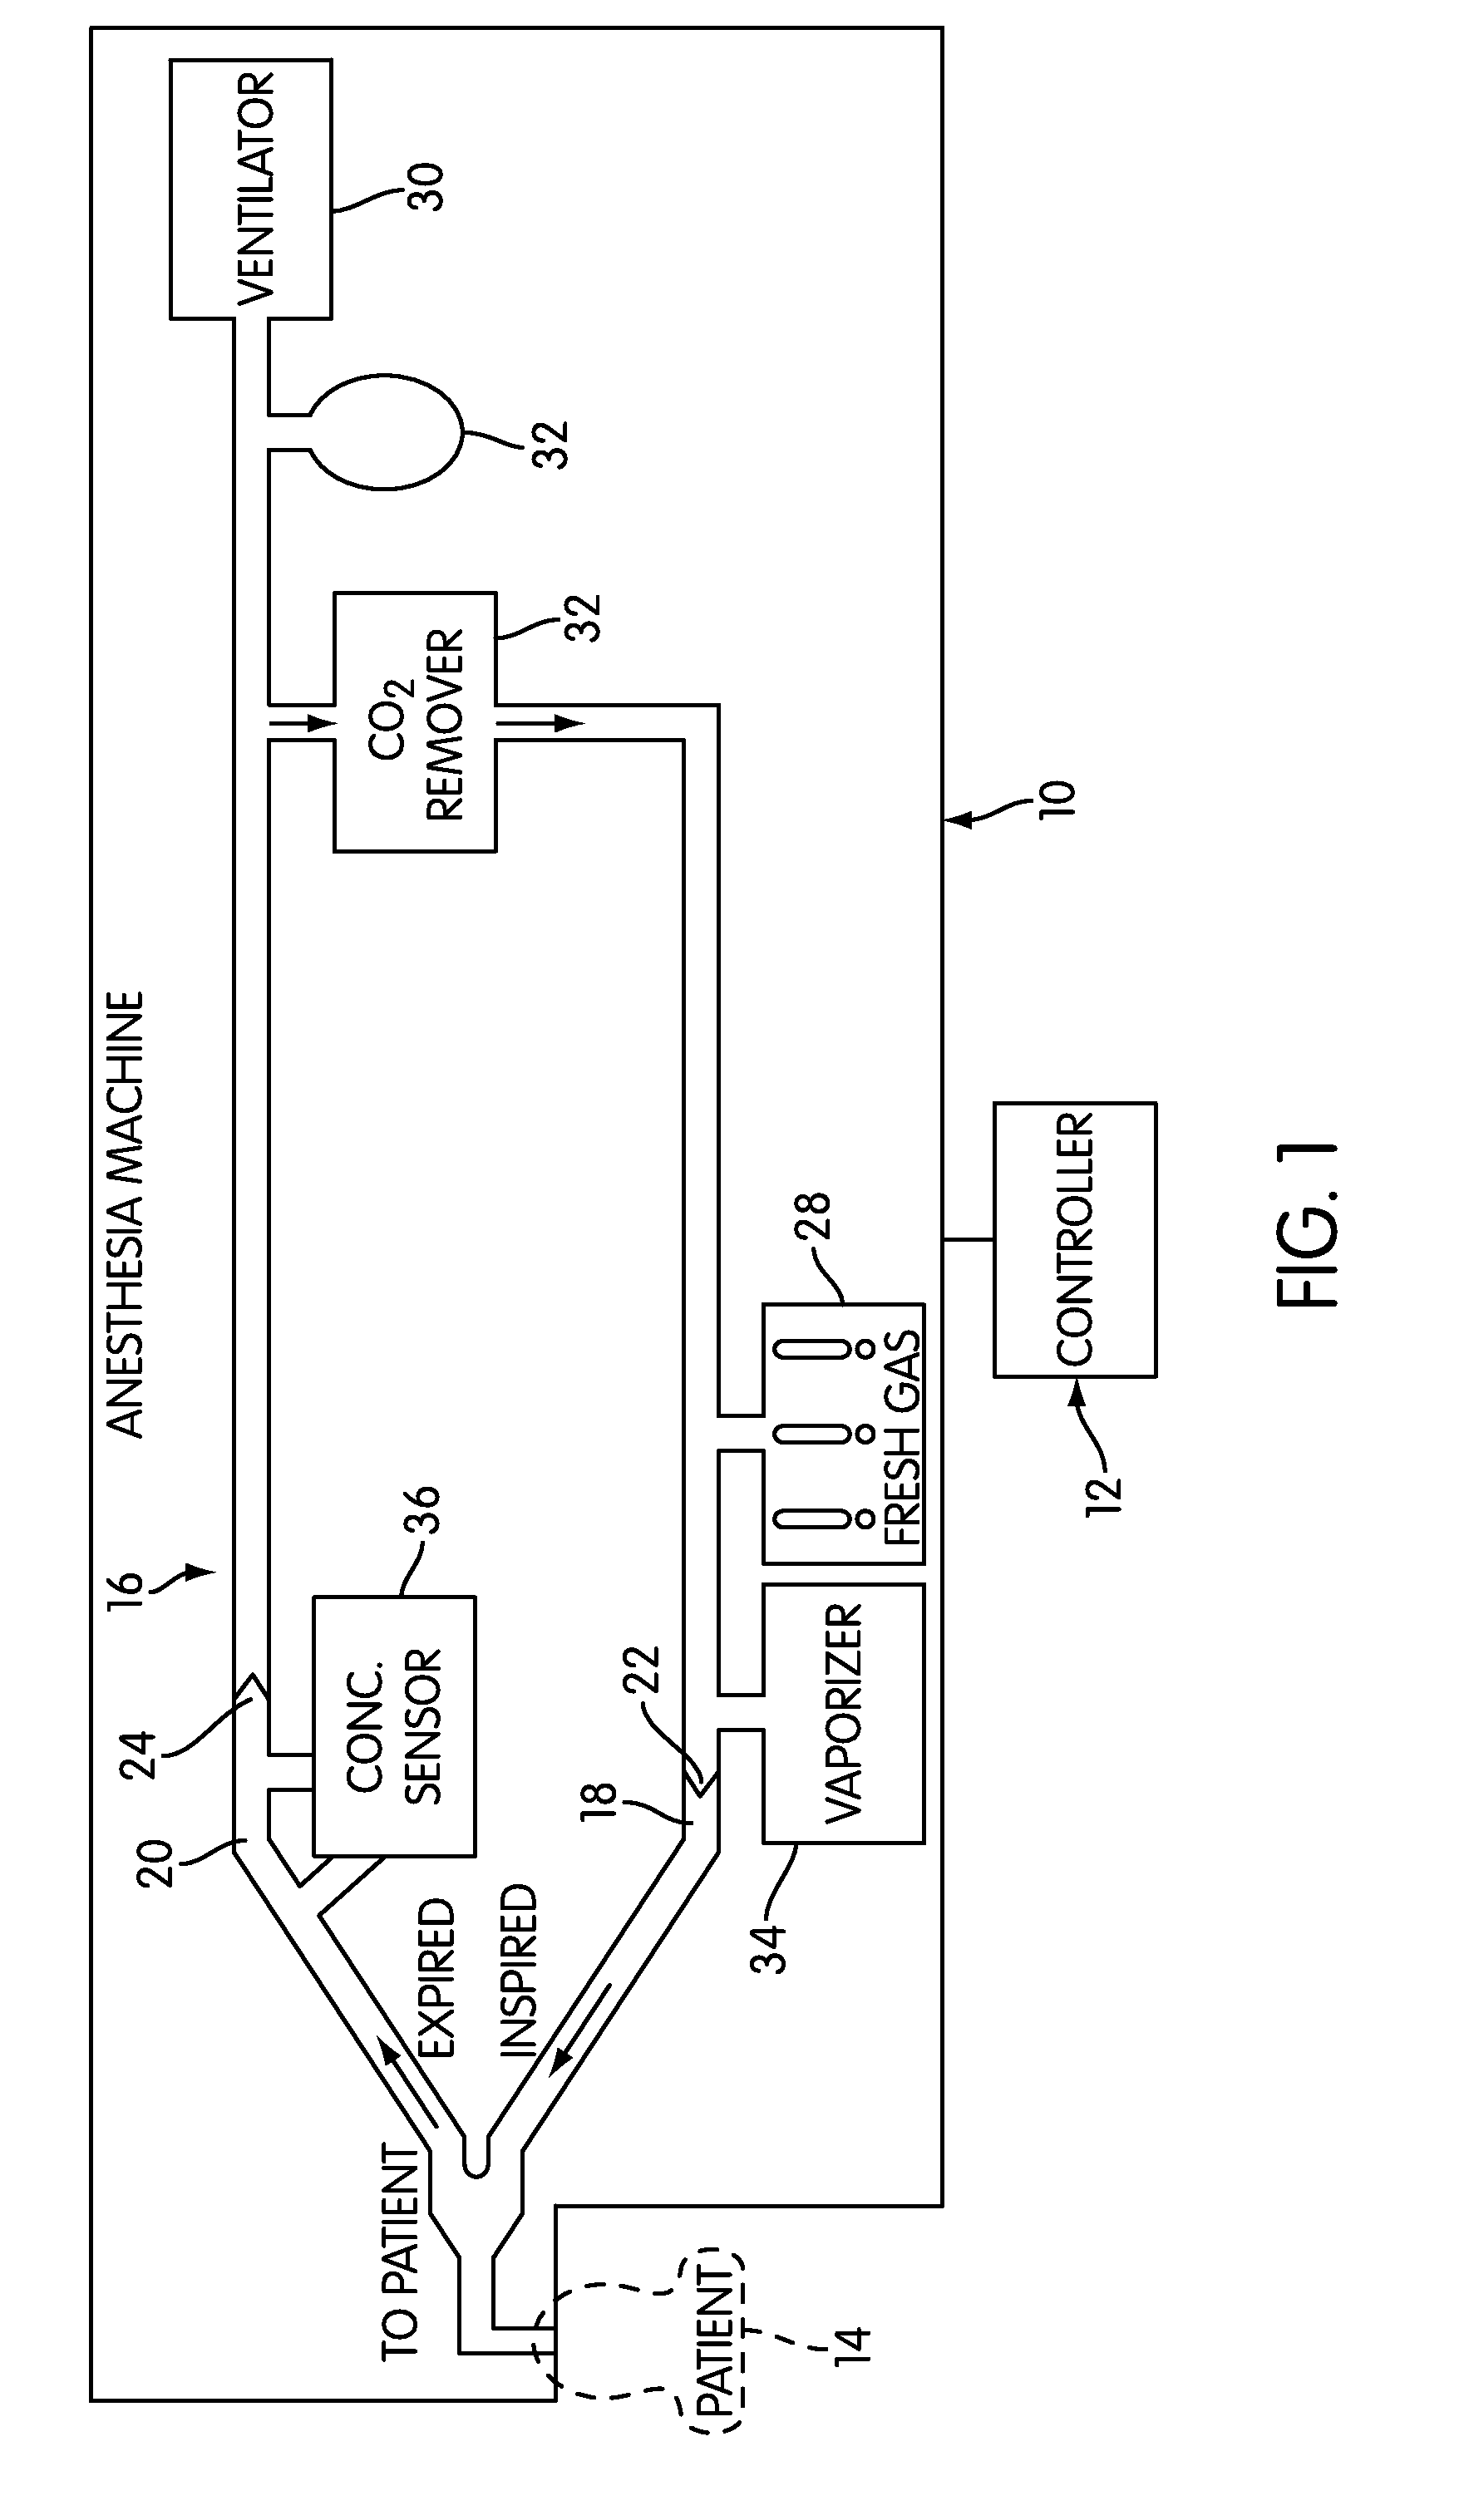 Anesthesia Simulator and Controller for Closed-Loop Anesthesia